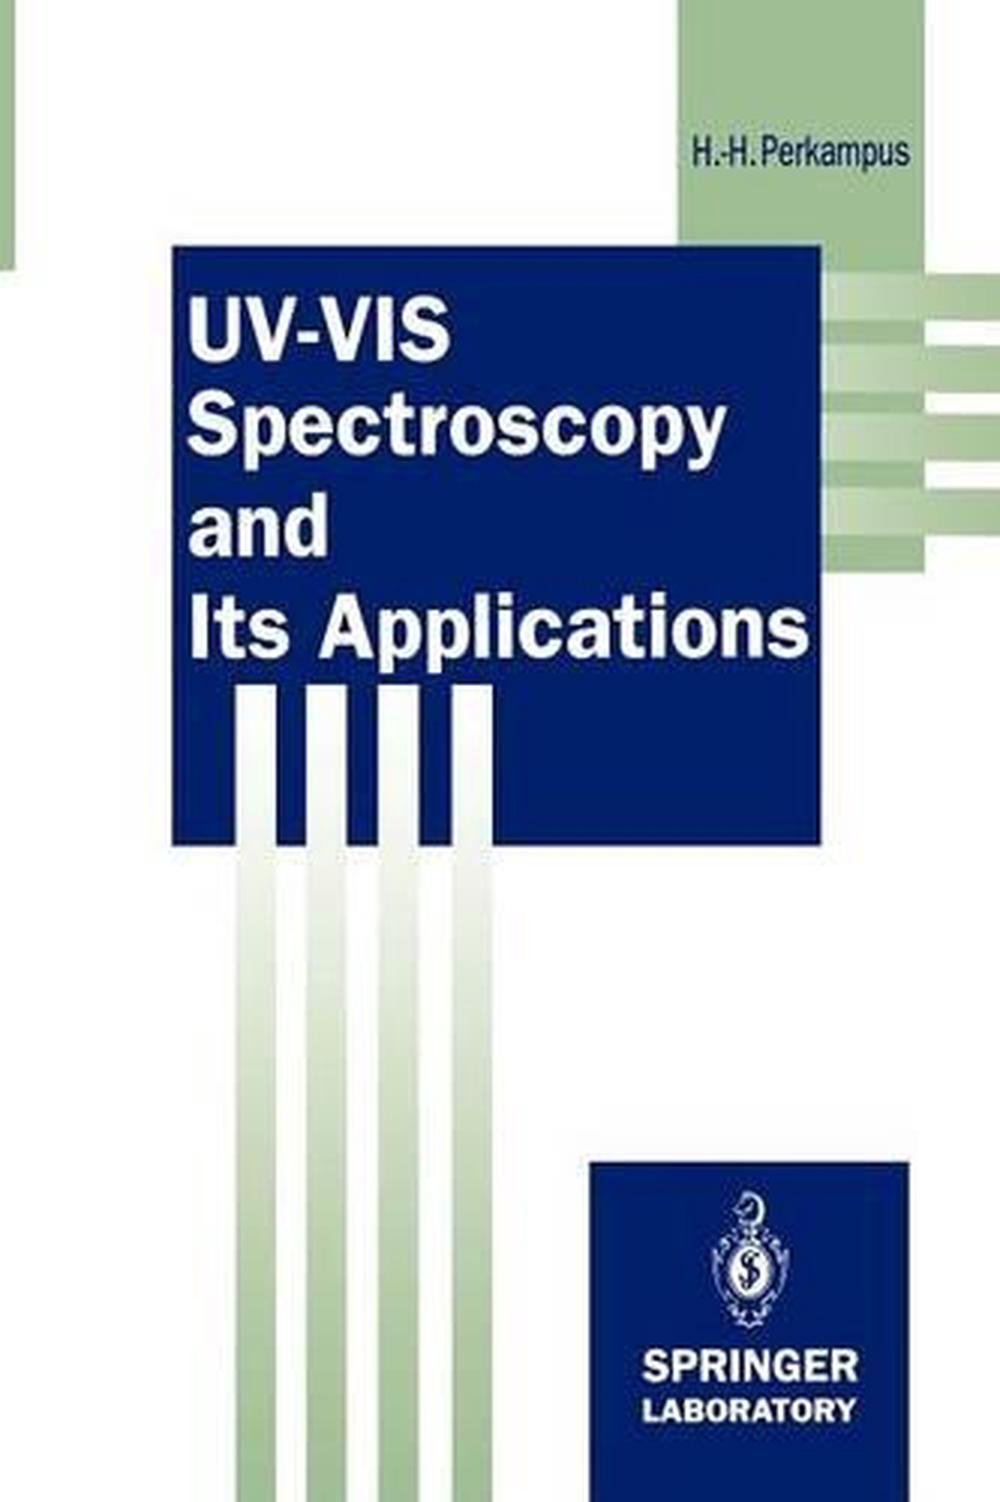 UVVIS Spectroscopy and Its Applications by HeinzHelmut